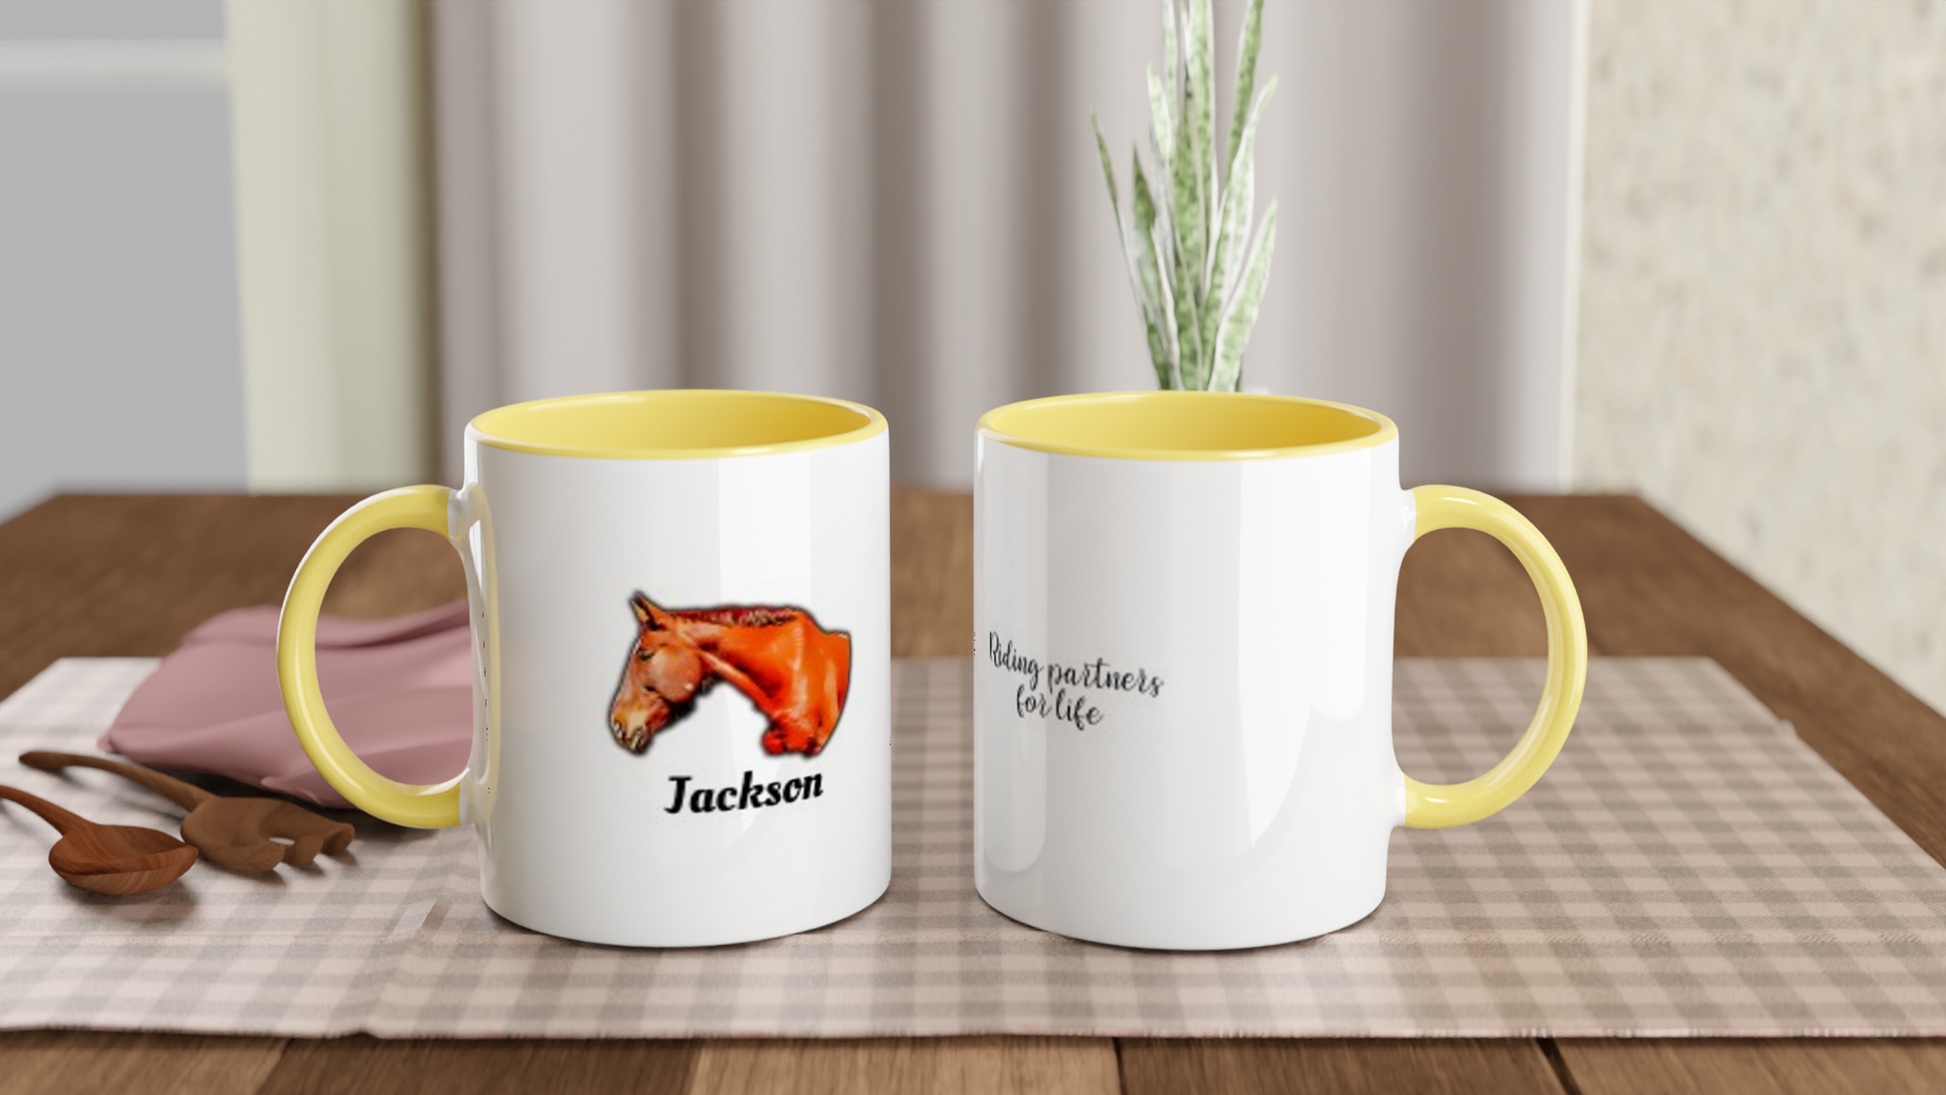 Hand Drawn Horse || 11oz Ceramic Mug with Color Inside - Comic - Personalized; Personalized with your horse